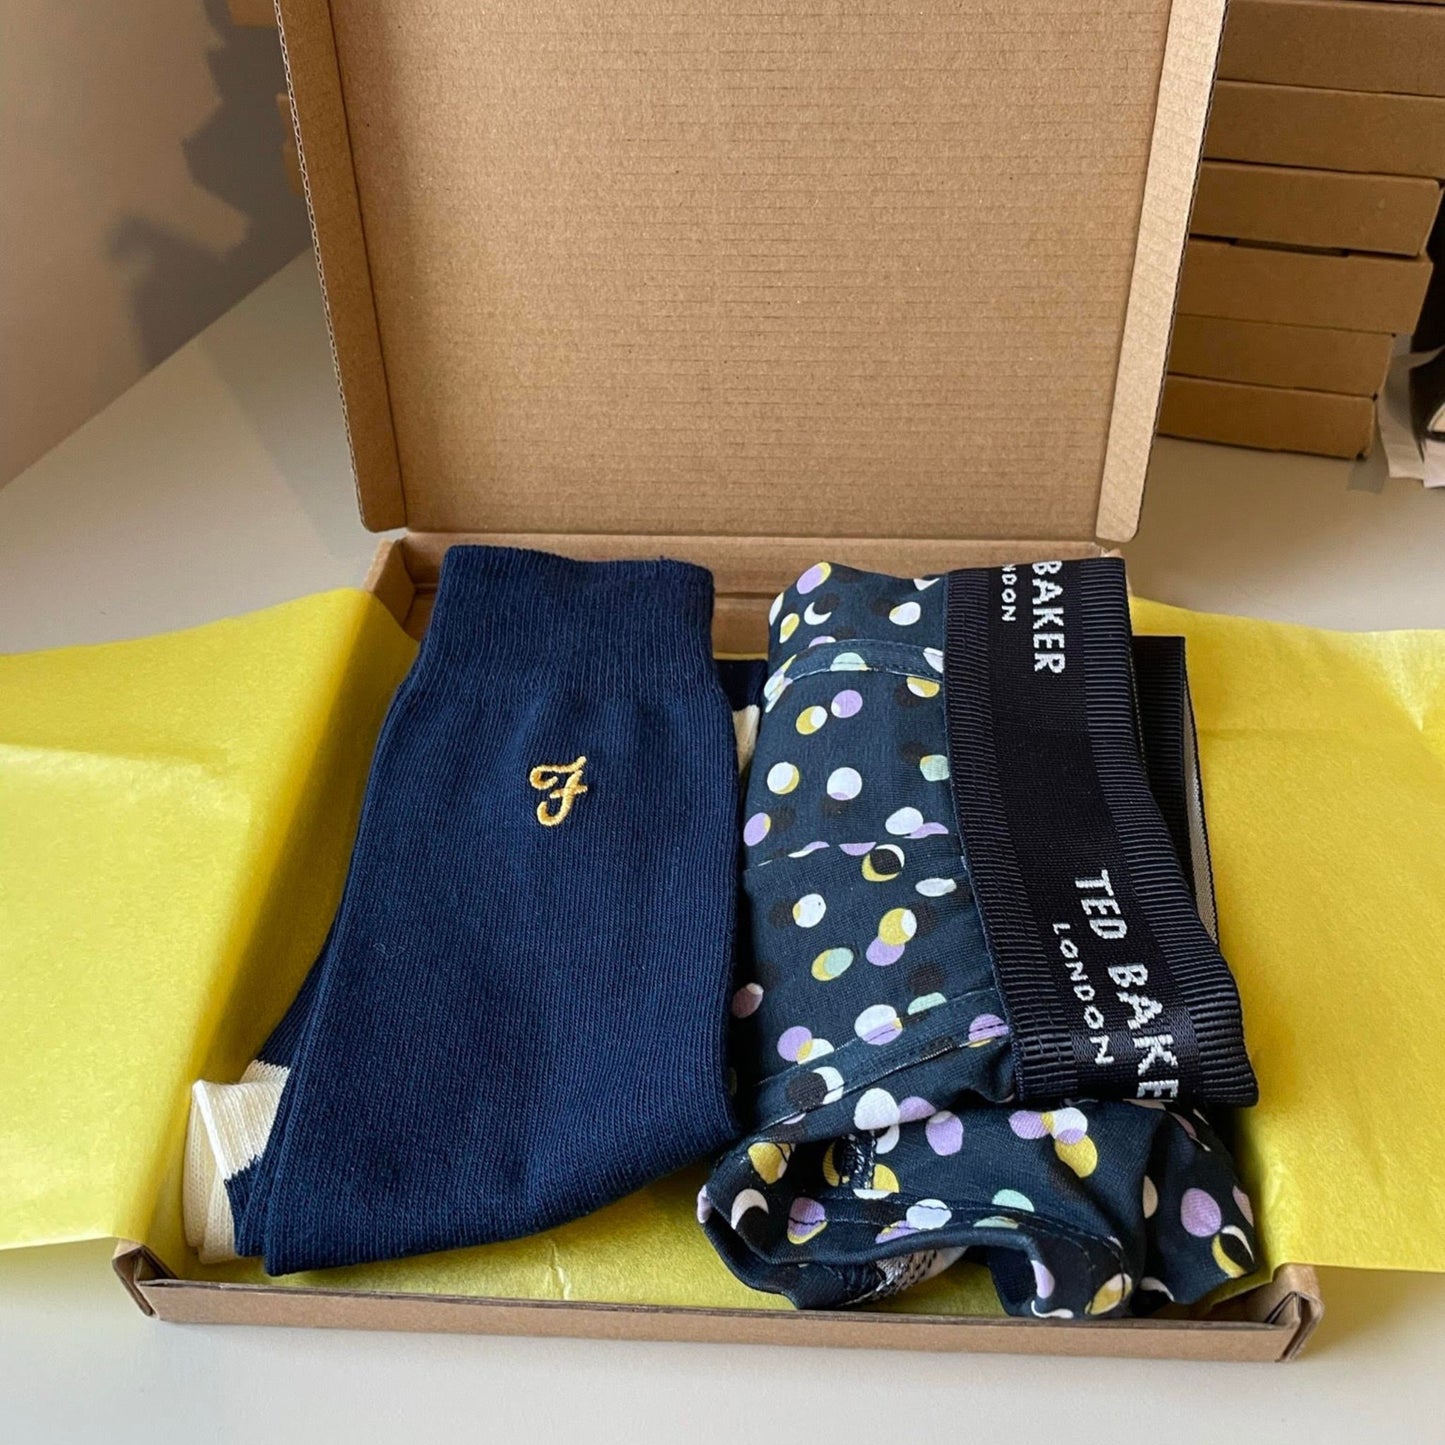 Letterbox Jox Socks & Boxers Subscription Box - Ongoing Subscription